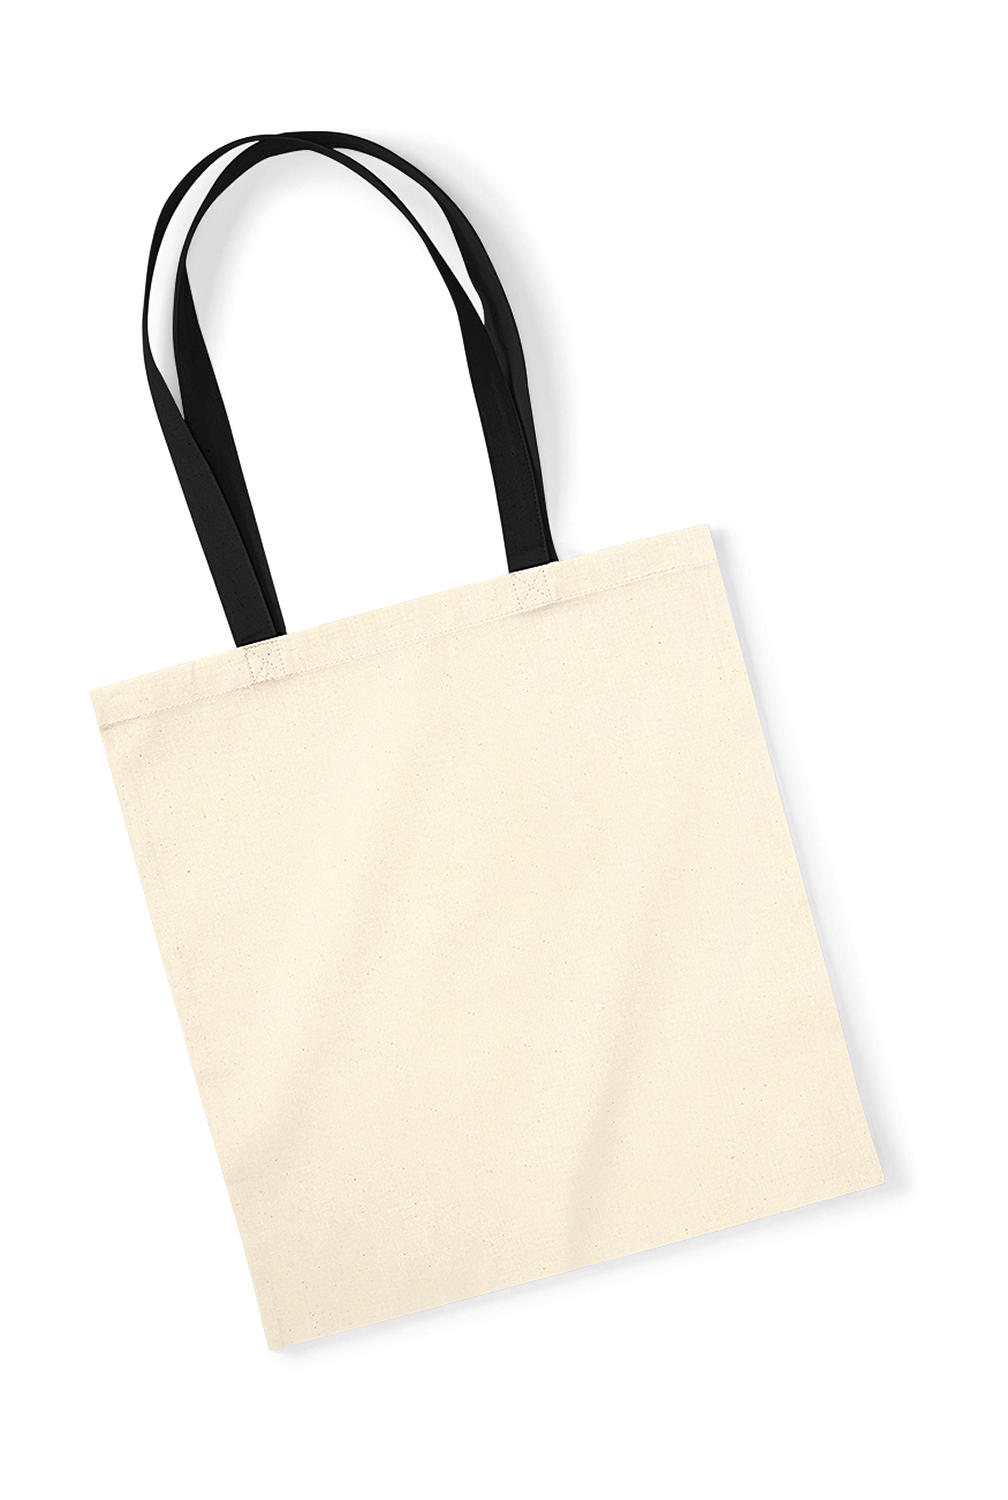  EarthAware? Organic Bag for Life - Contrast Handle in Farbe Natural/Black